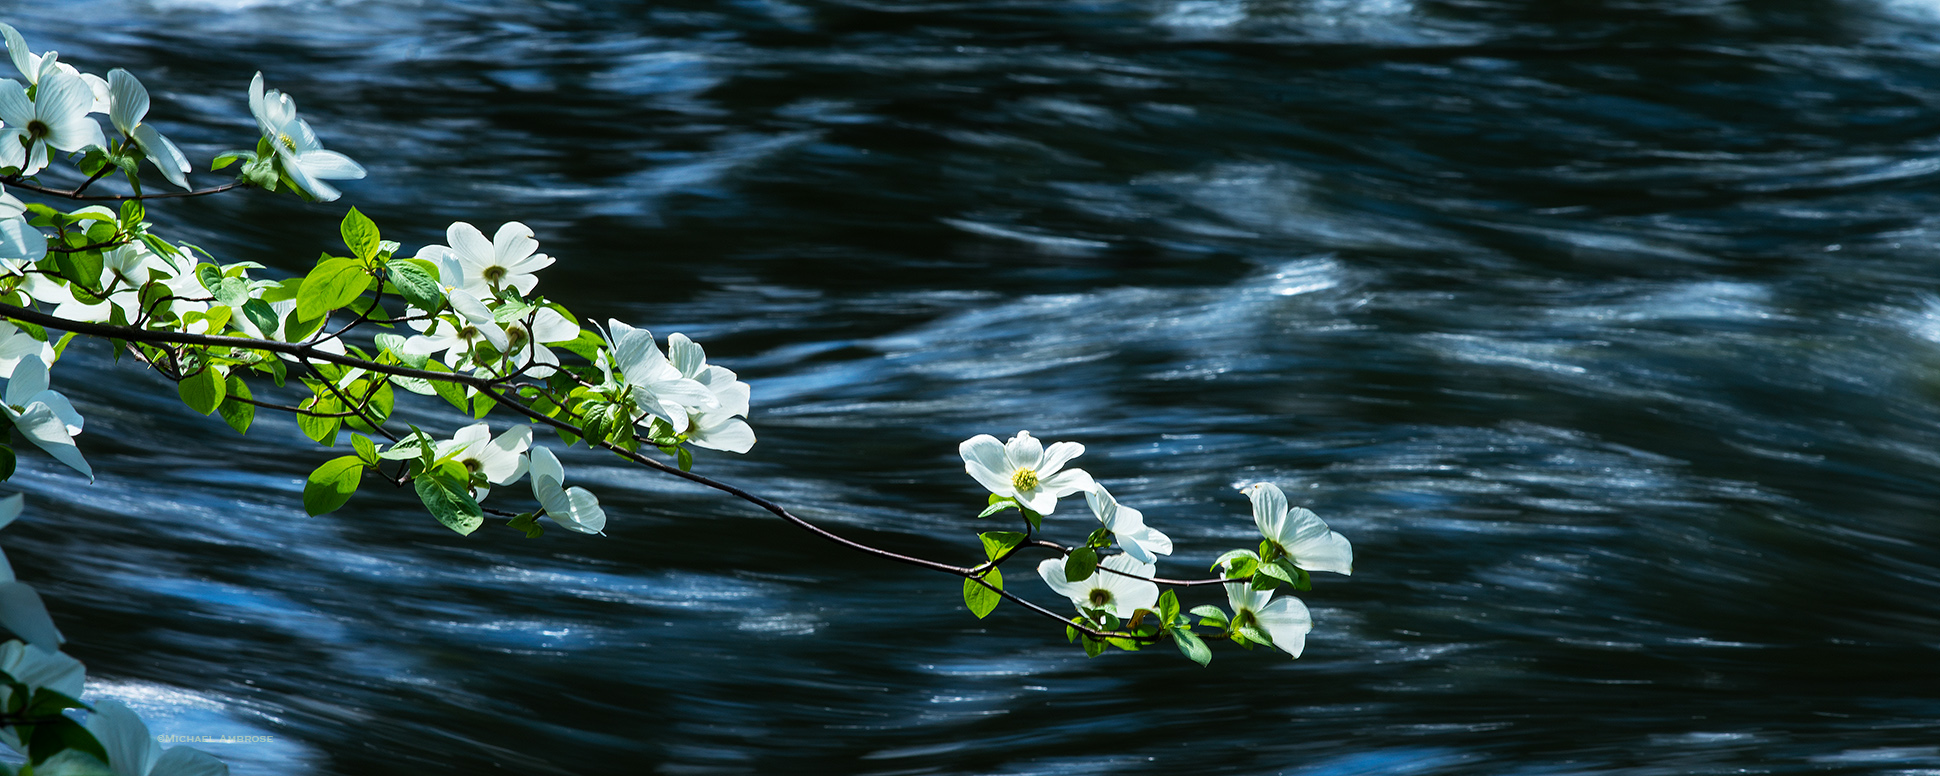 I had spent all day making photographs of the Dogwood bloom along the Merced River, but did not expect this wonderful painterly...